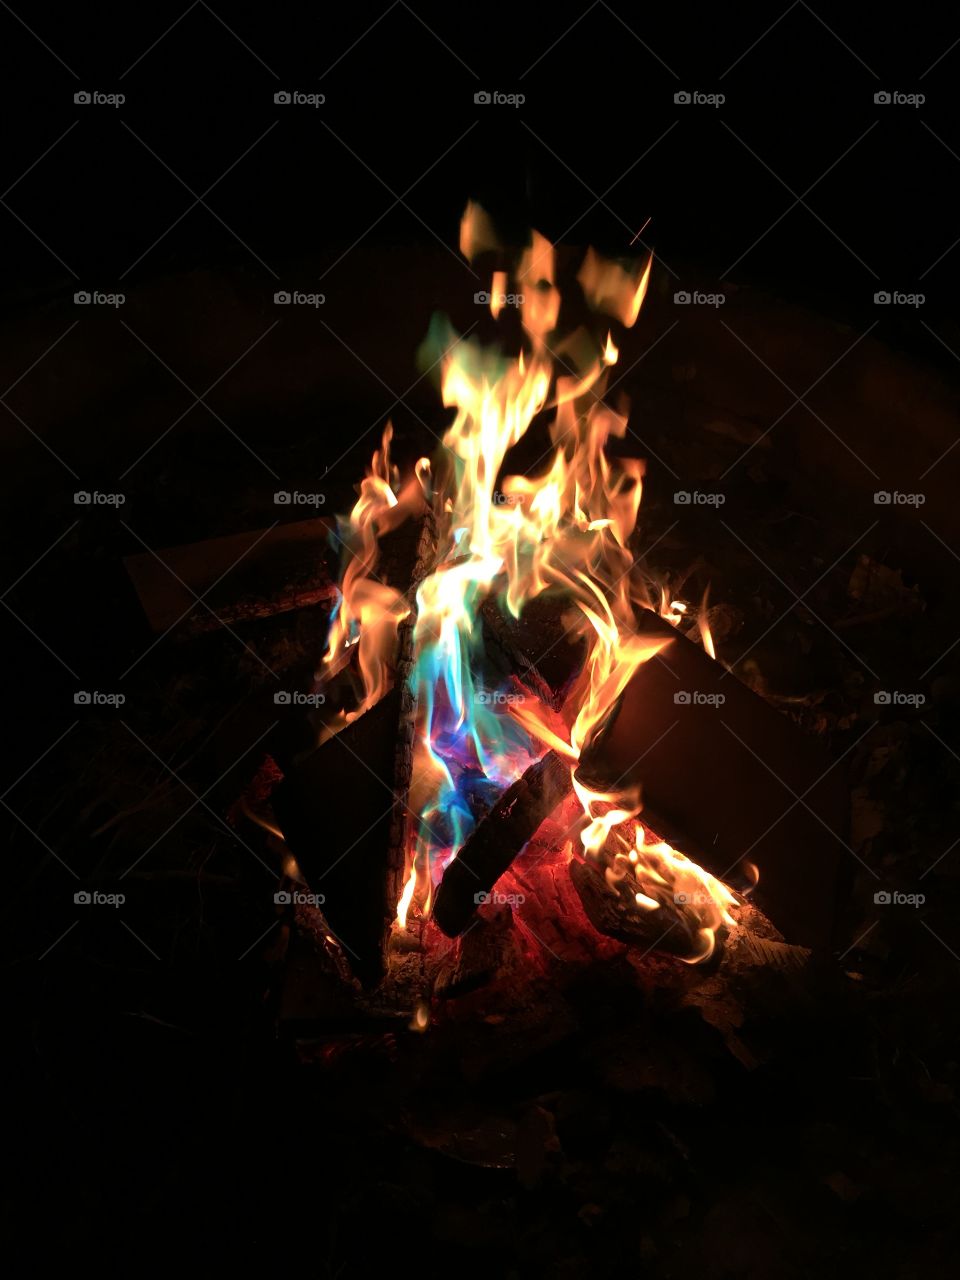 Mystic fire . Colorful backyard with flames of blue green red yellow orange